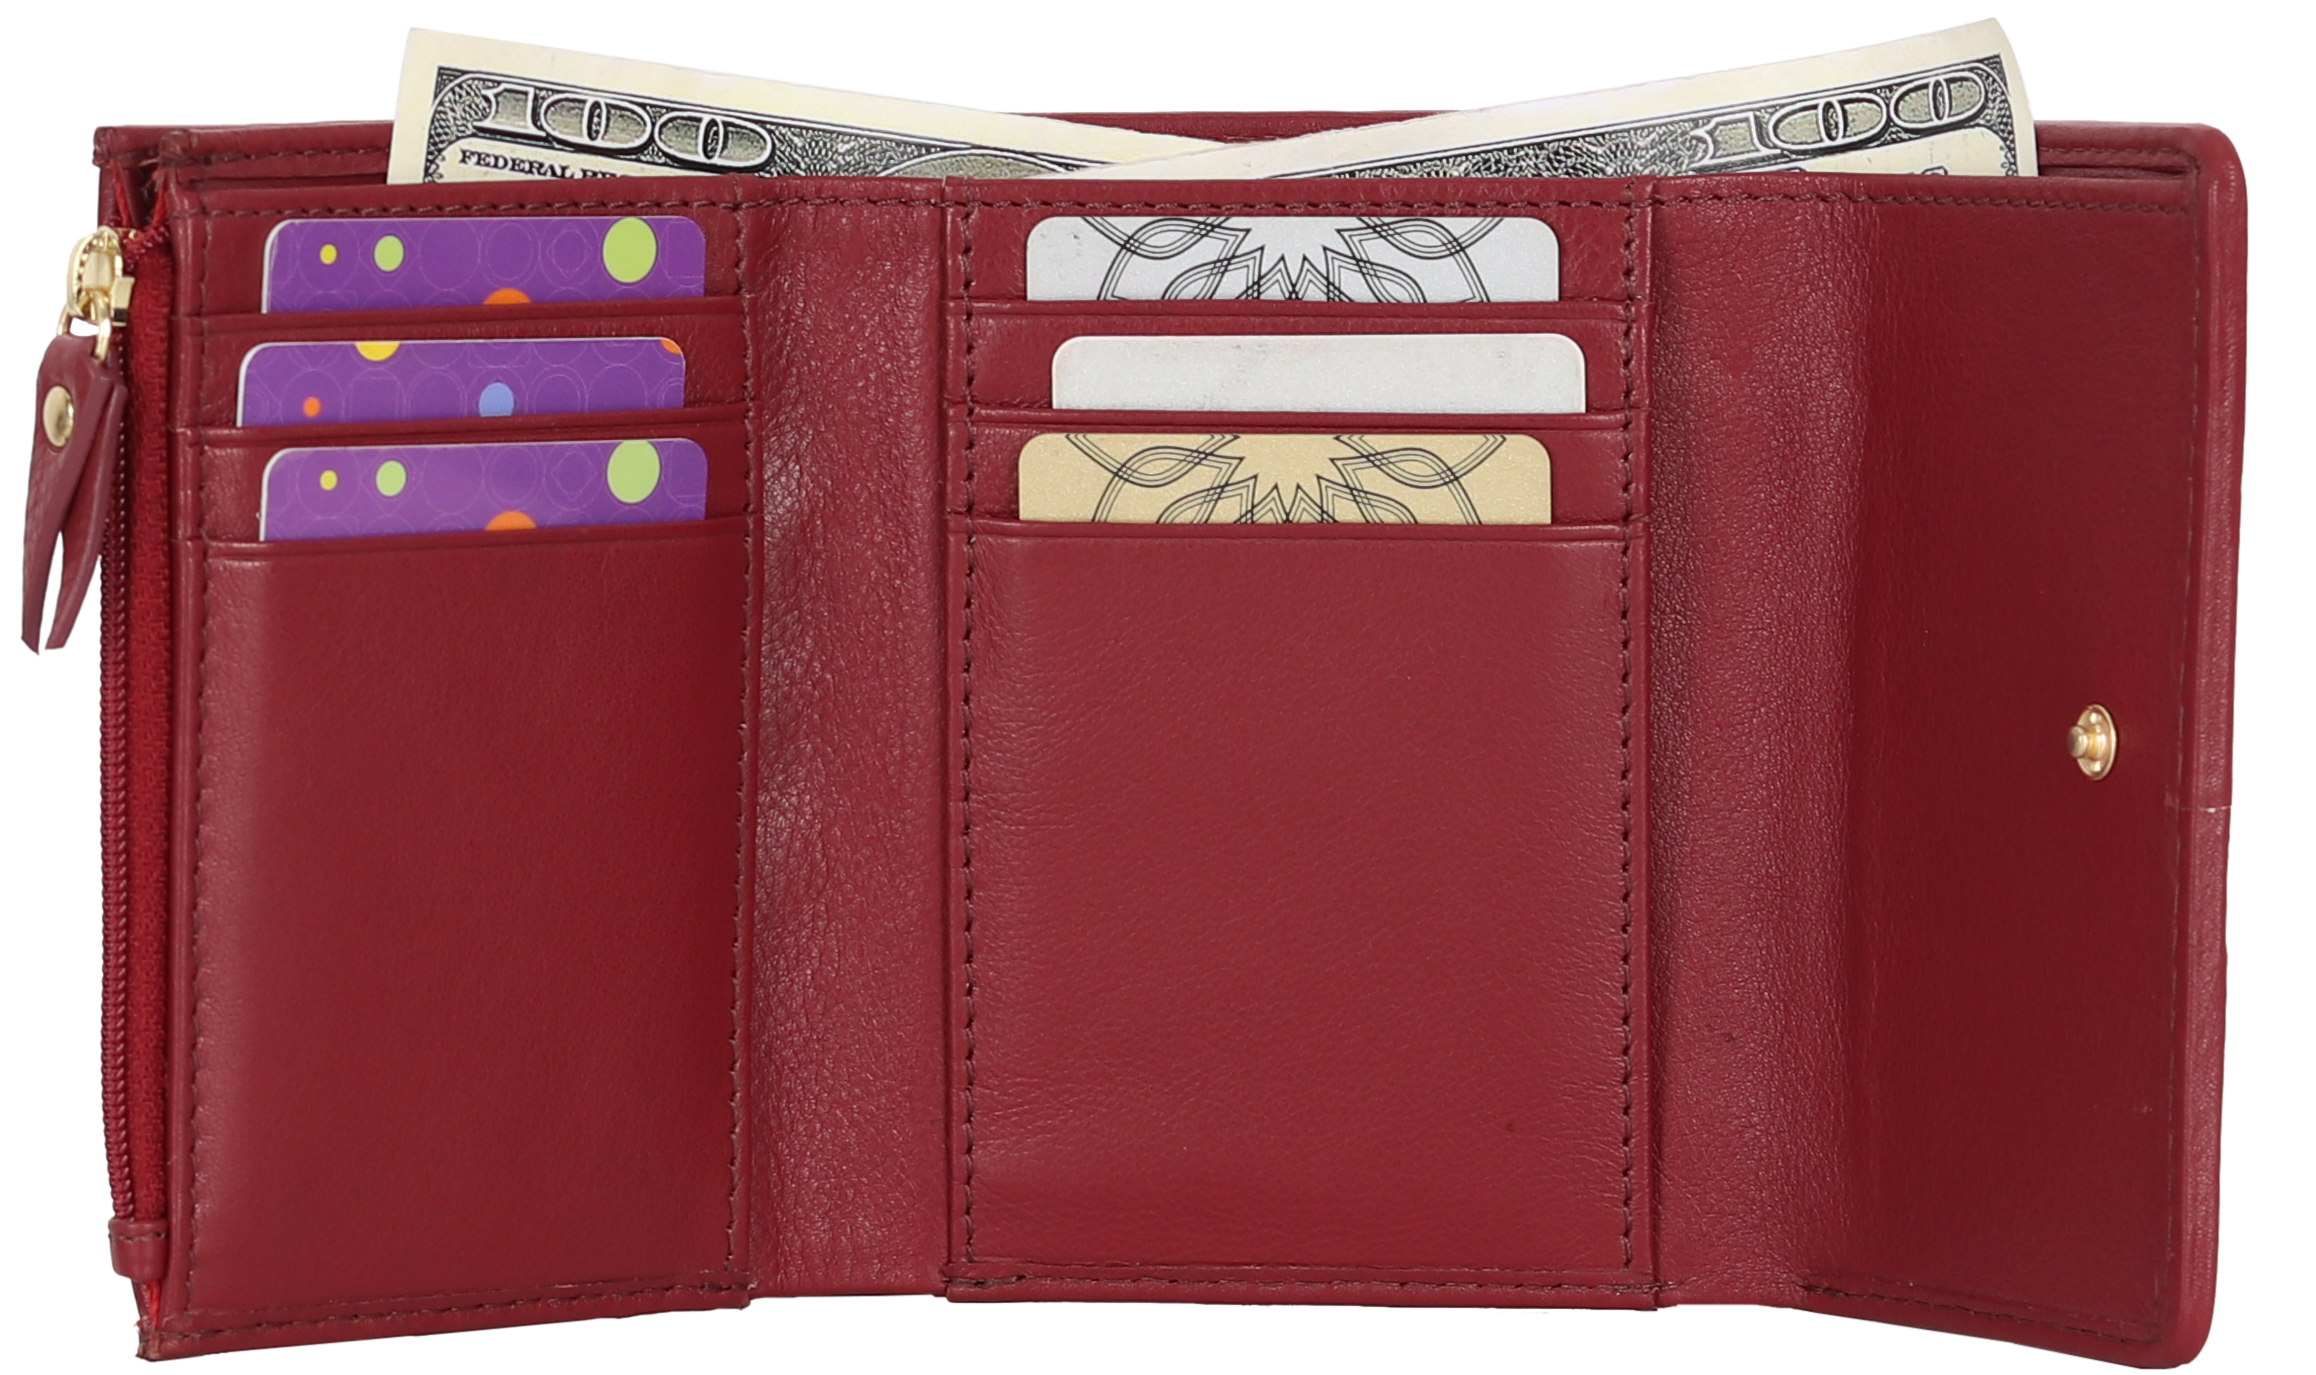 Rugged Earth Women's Leather Wallet